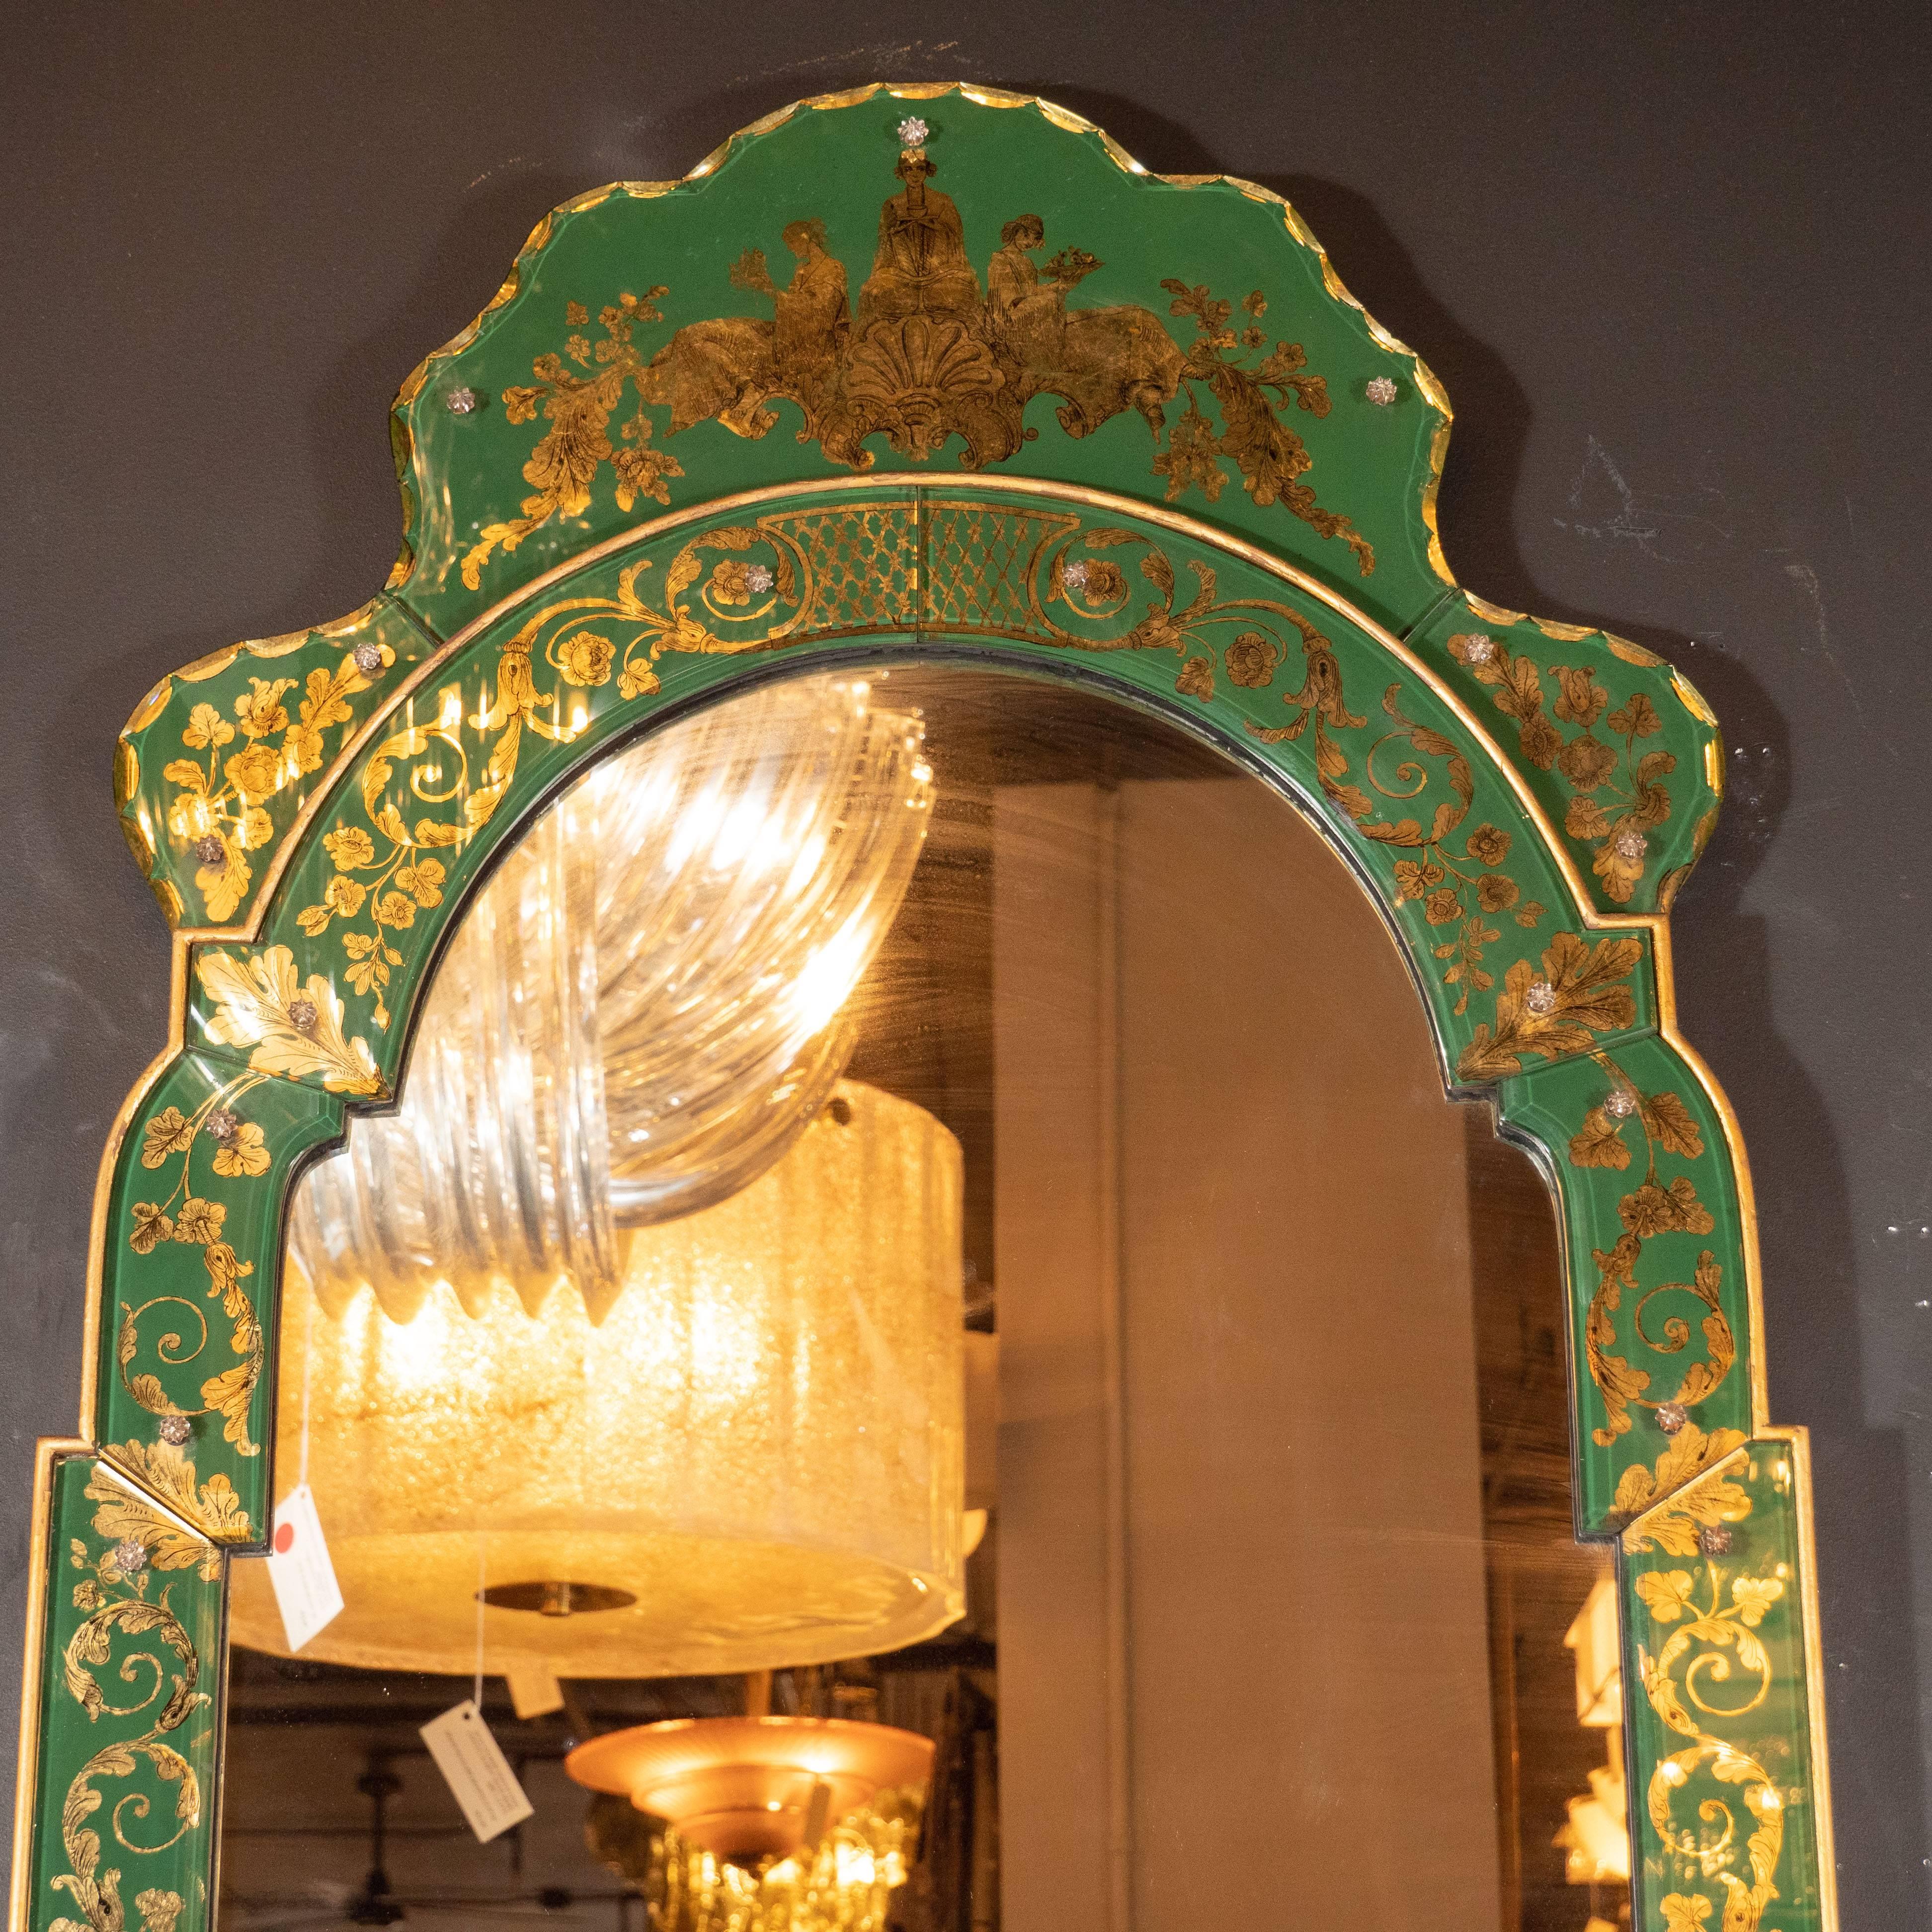 This elegant mirror was realized in the United States, circa 1950. It features an arch form body of giltwood with curvilinear and architectonic detailing; beveled gilded edges; and neoclassical motifs in reverse églomisé. Three female figures